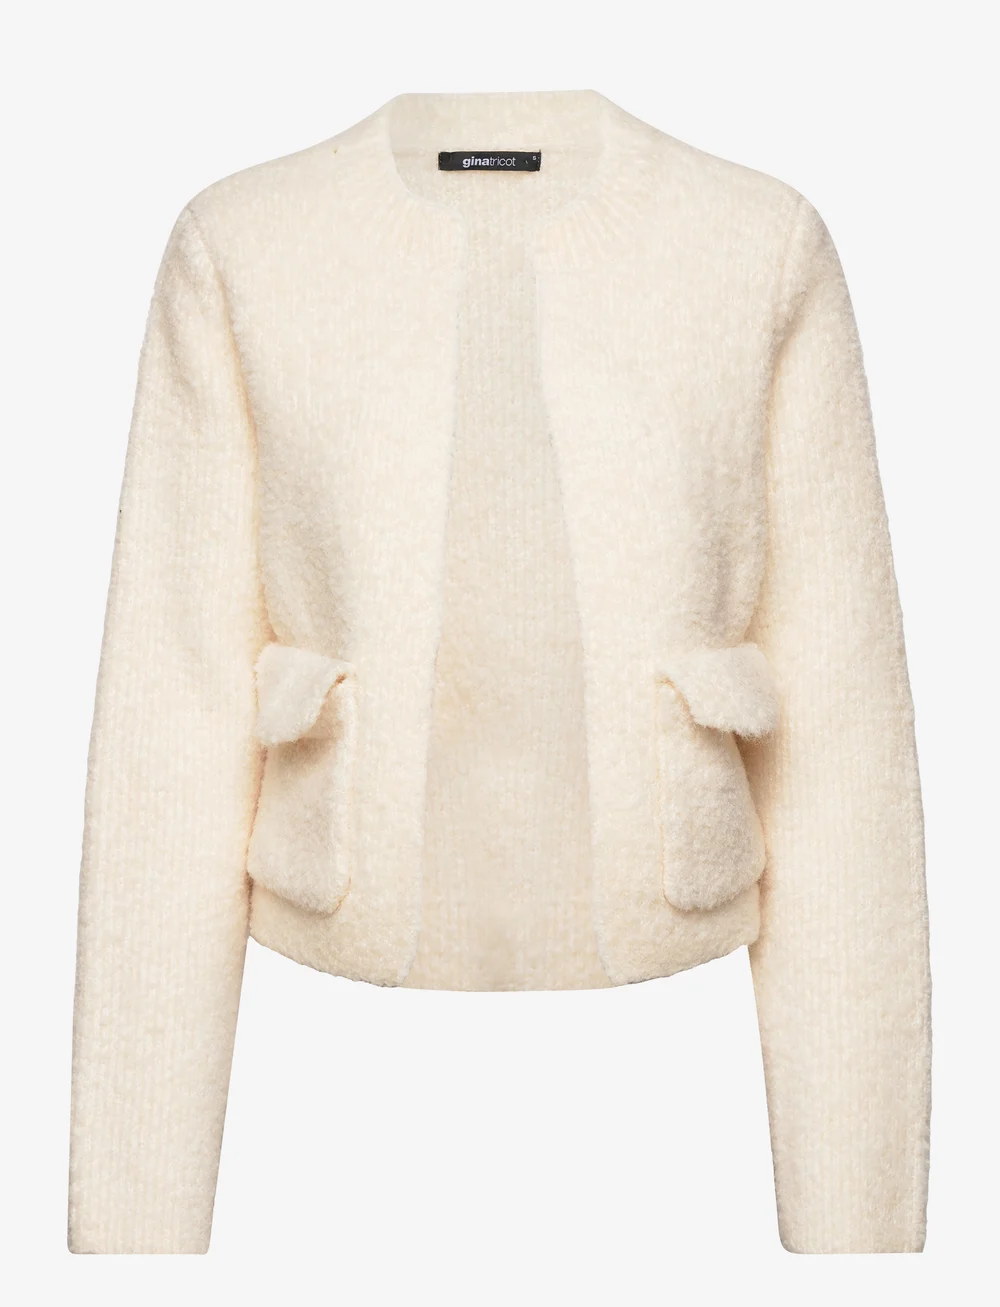 Gina Tricot Knitted Jacket - Cardigans 